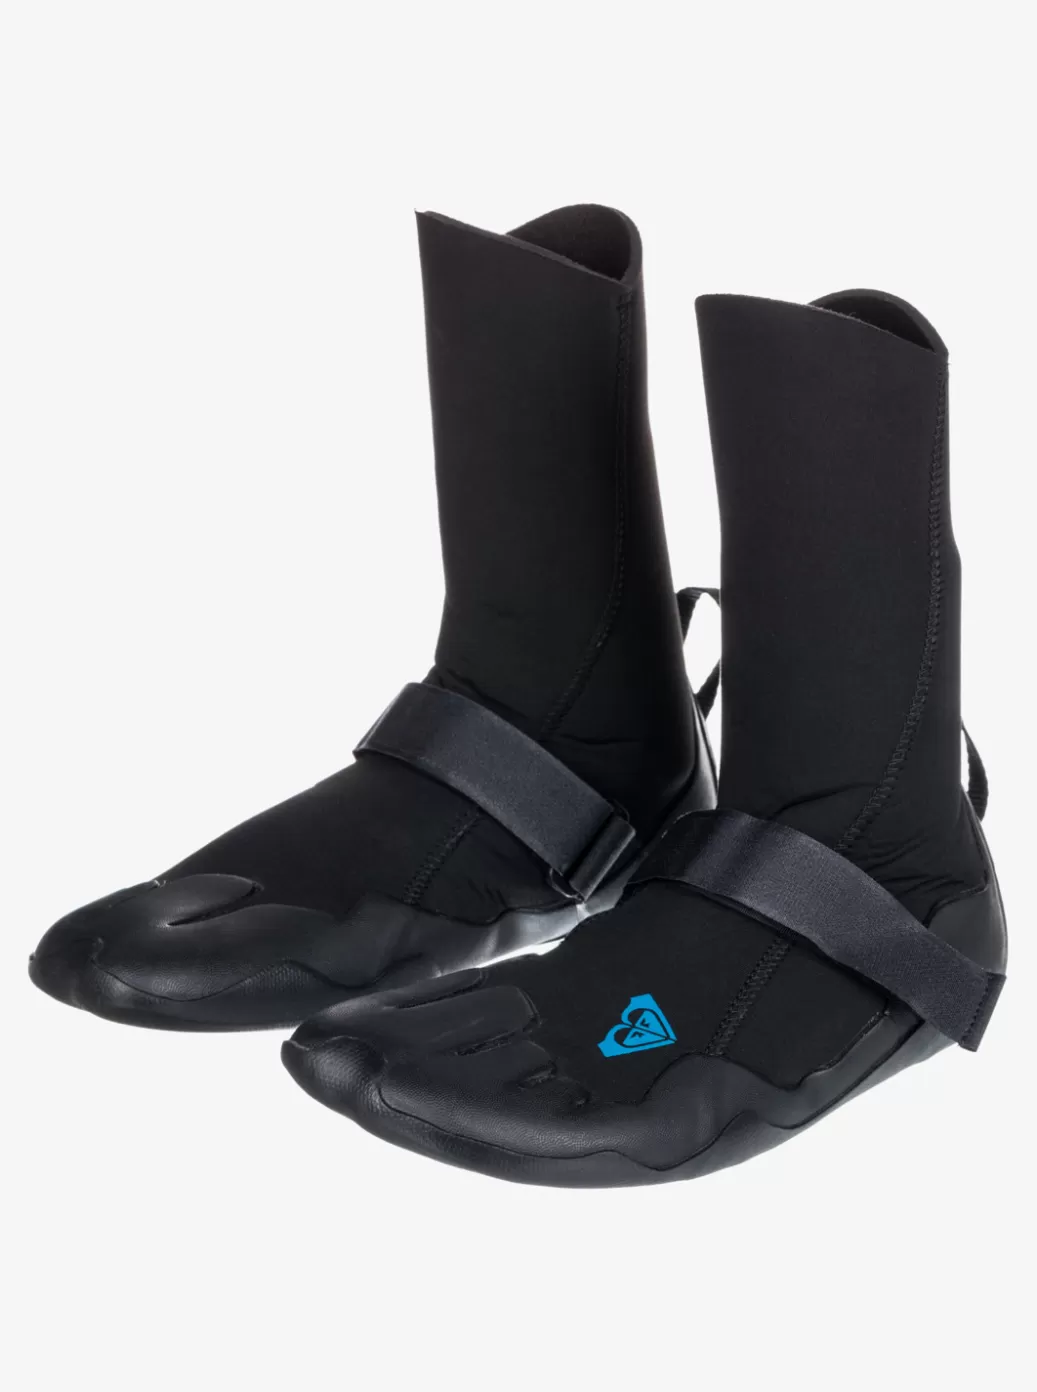 Swell Series | Surf Boots | WOMEN ROXY 5mm Swell Series Round Toe Wetsuit Boots True Black